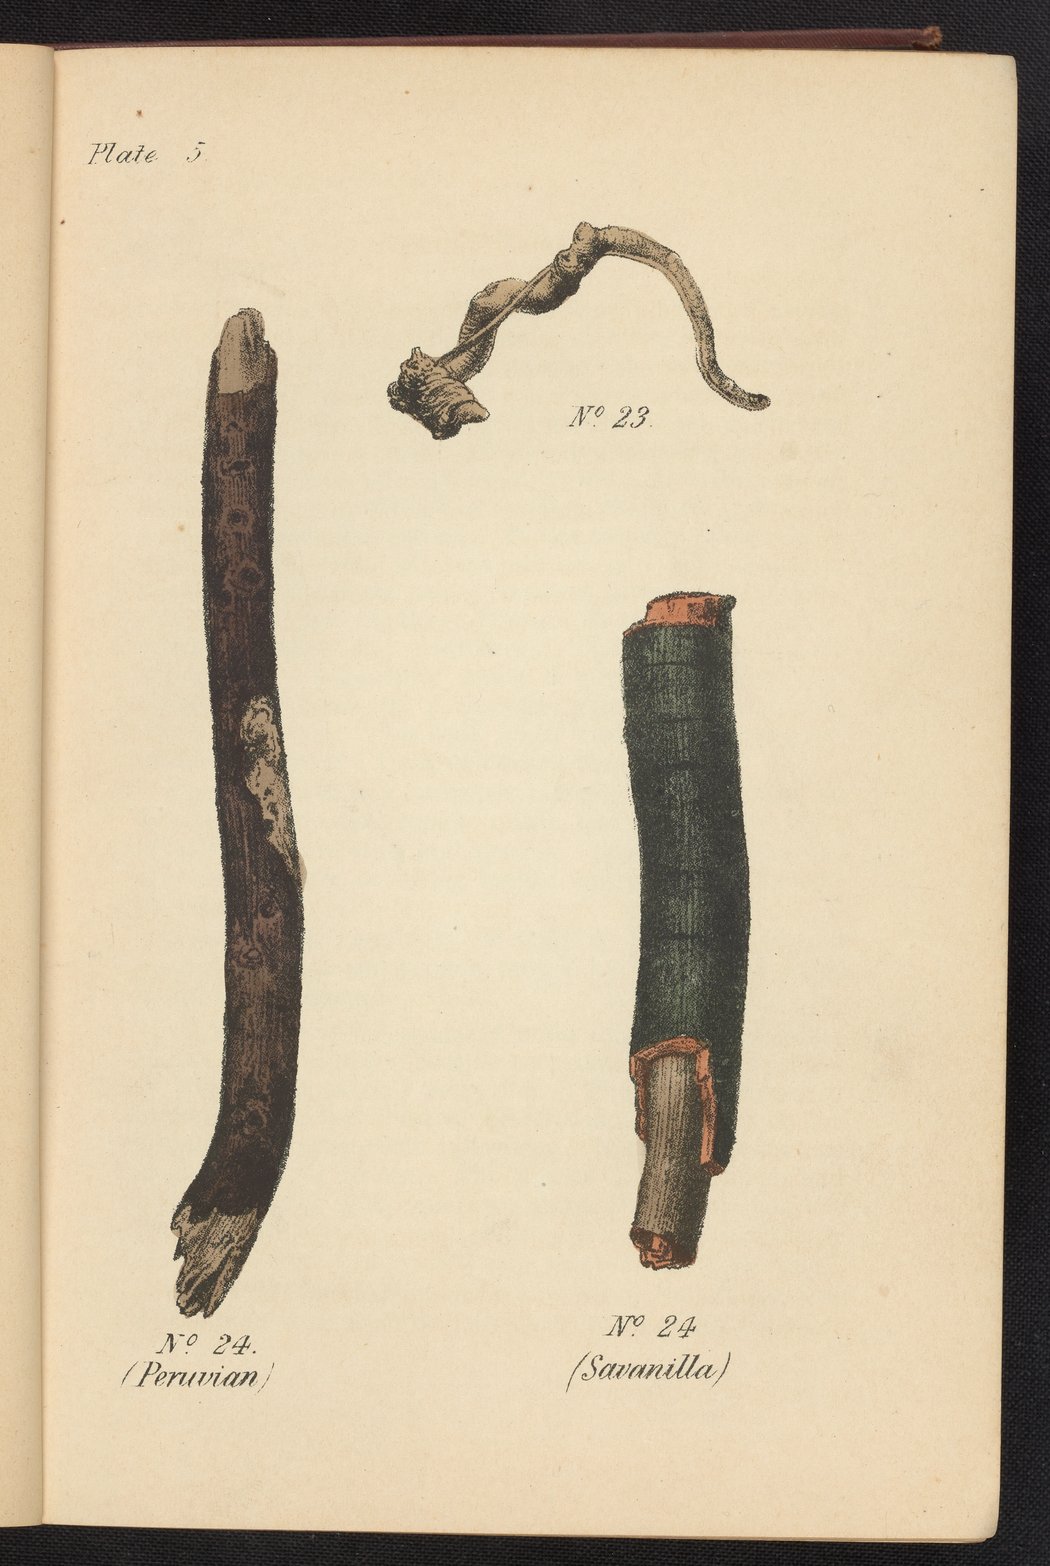 Plate 5: Medicinal roots from the family Polygalaceae